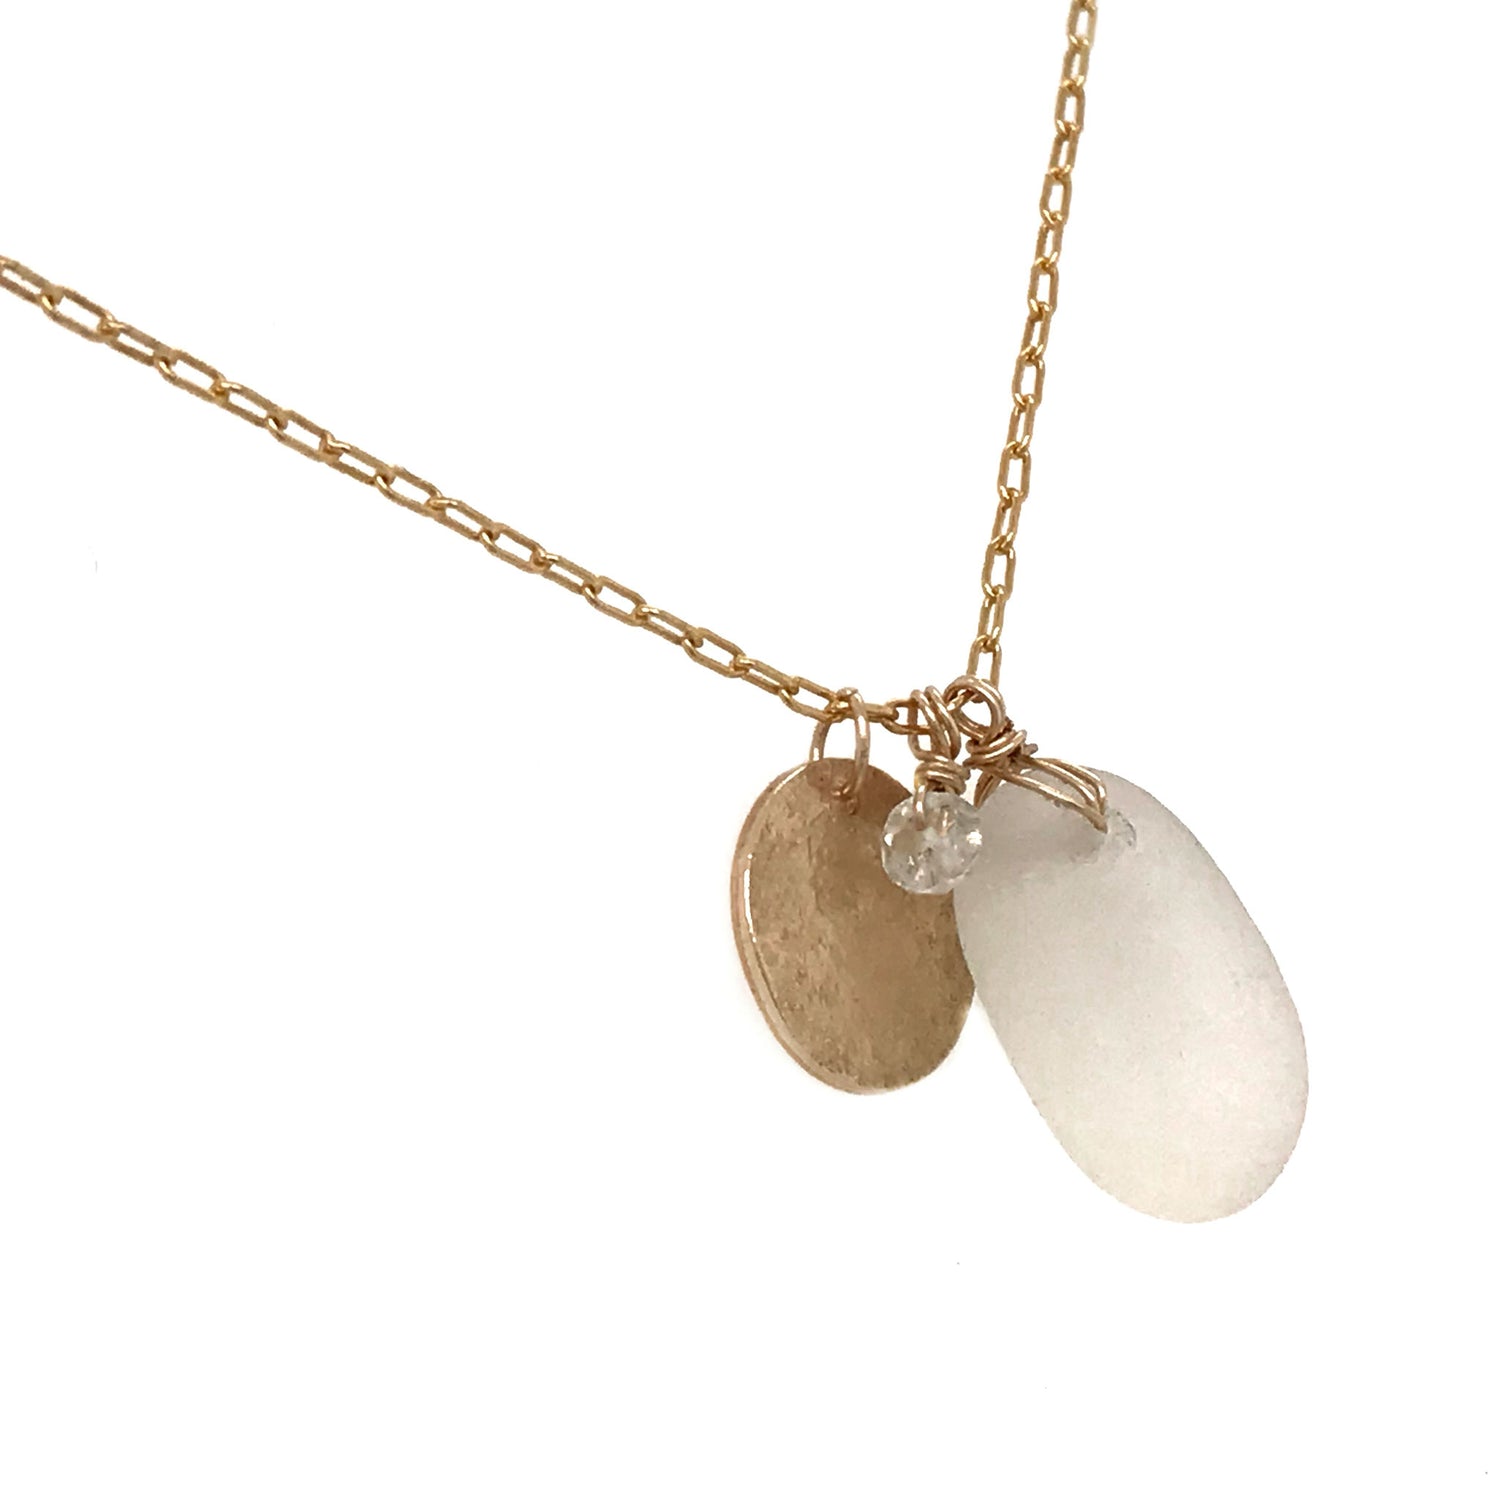 gold disc charm necklace with clear seaglass pendant kriket broadhurst jewellery